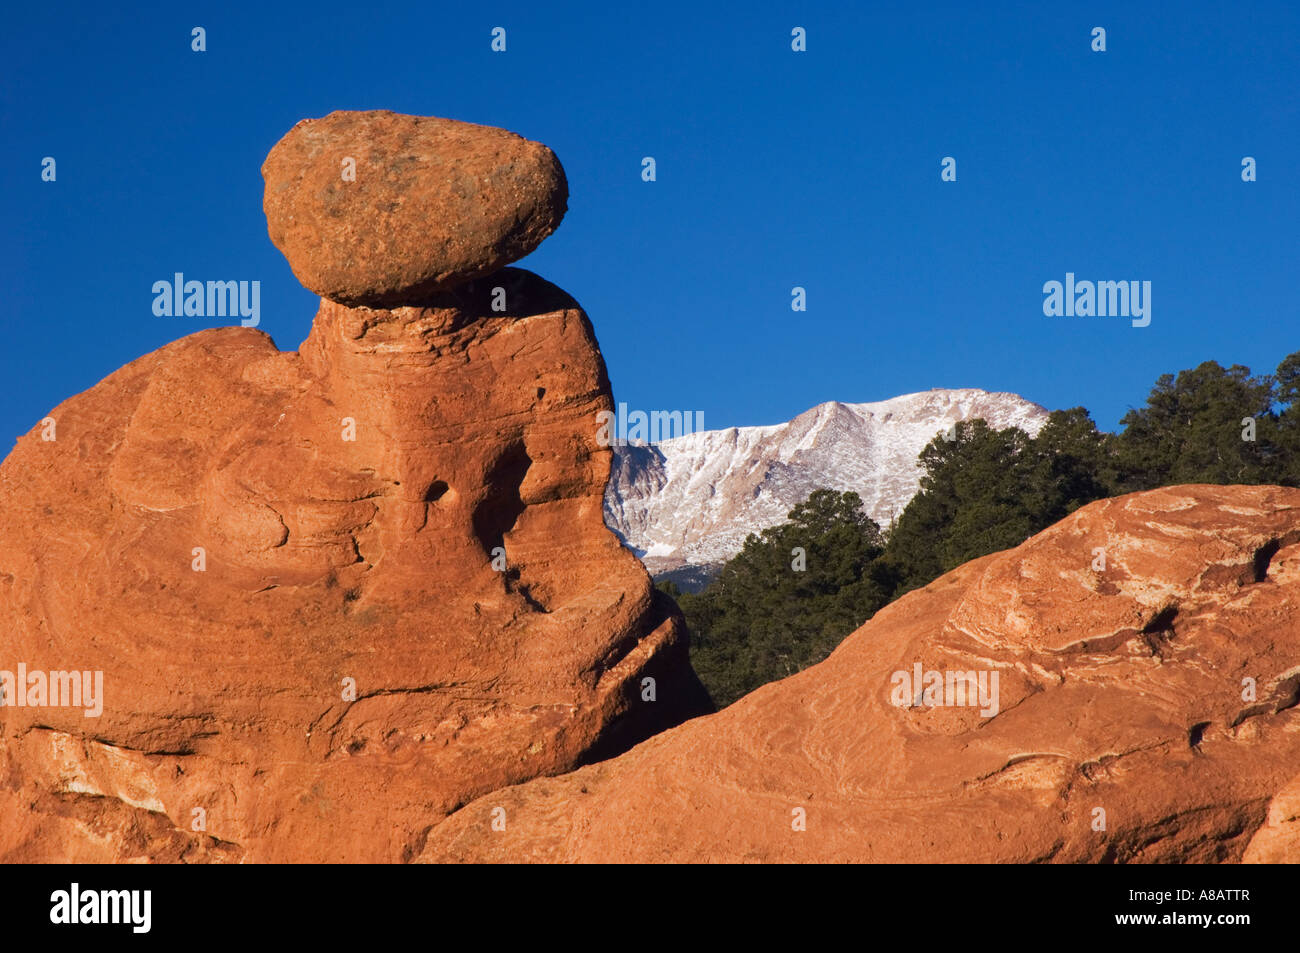 https://c8.alamy.com/comp/A8ATTR/rock-formation-and-pikes-peak-at-sunrise-garden-of-the-gods-national-A8ATTR.jpg